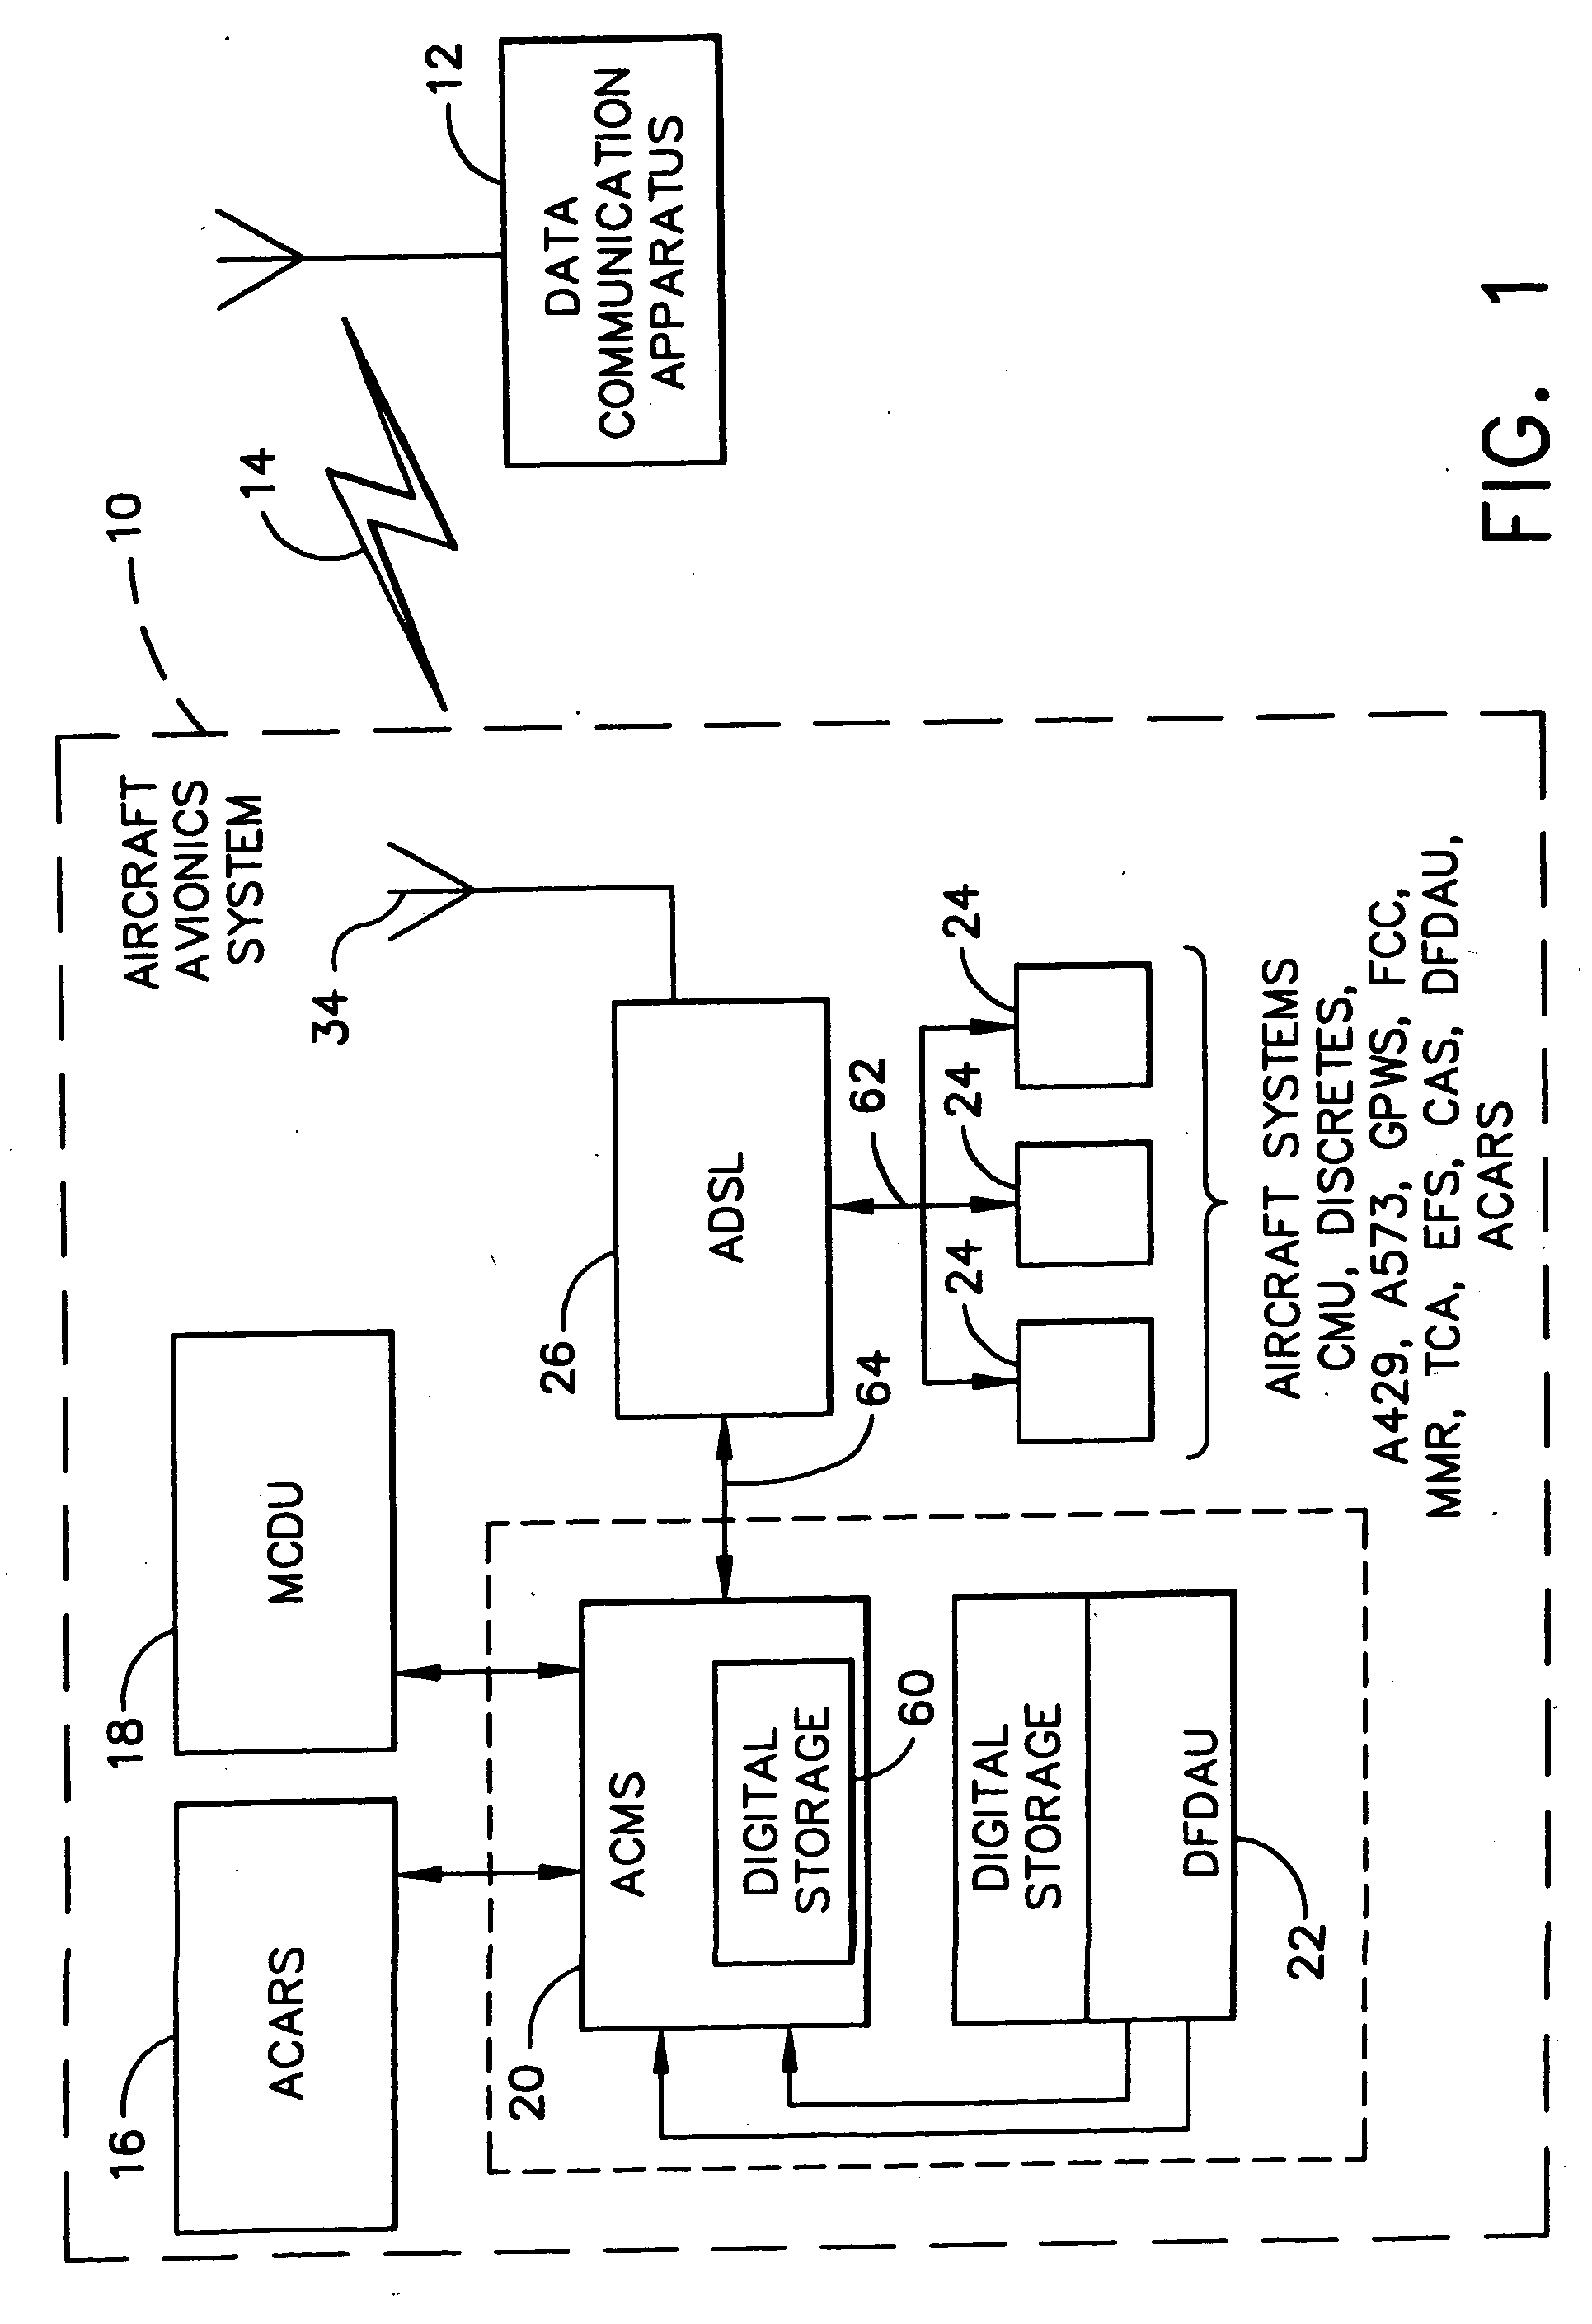 Methods and apparatus for wirelss upload and download of aircraft data